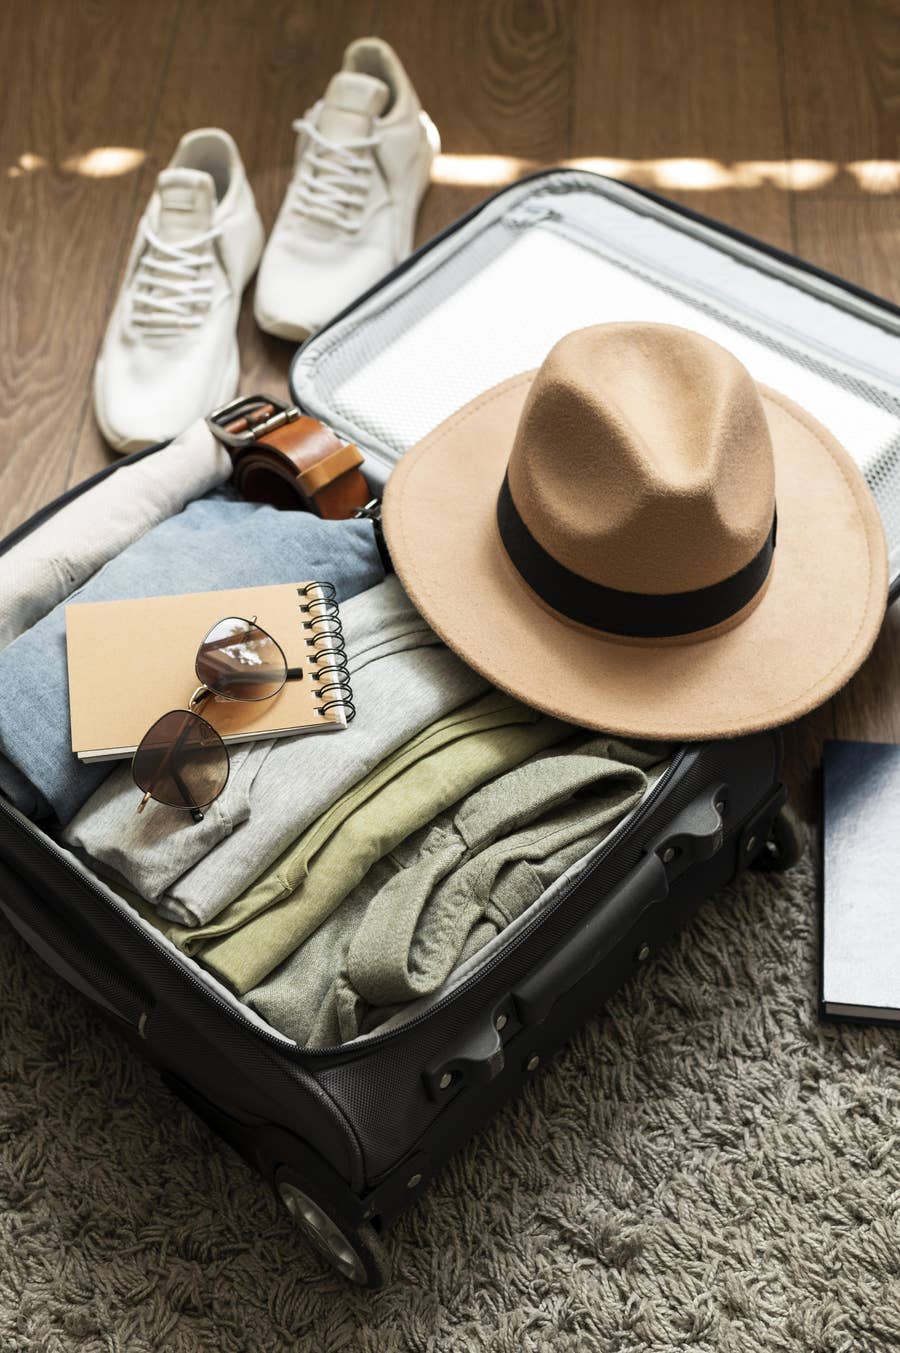 Packing 201: How to Get the Most out of a Carry-On